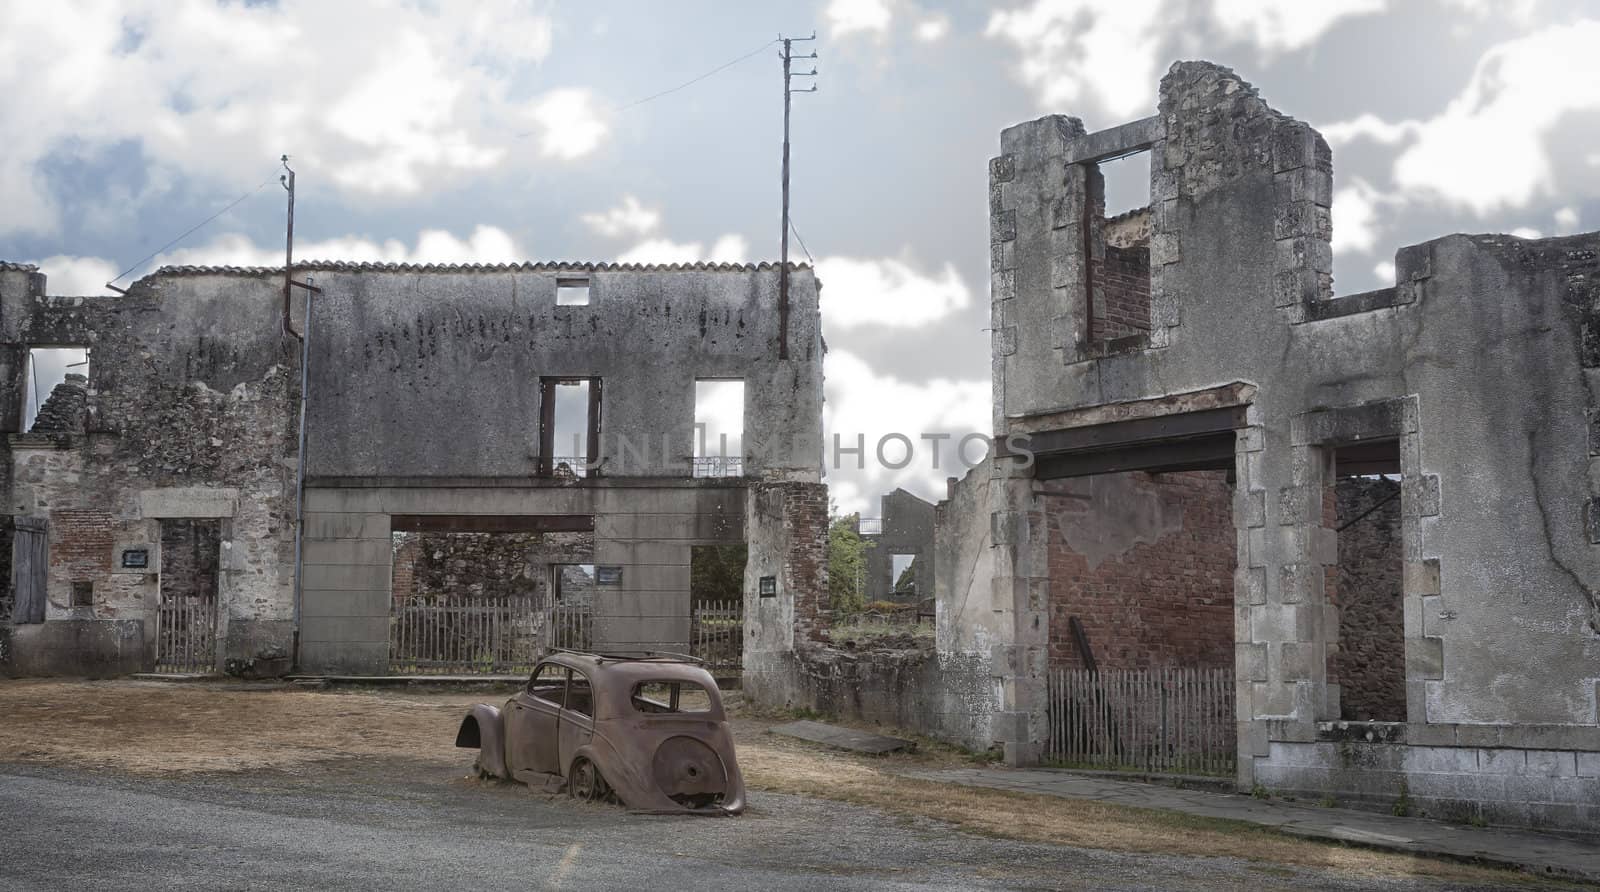 On June 10th 1944  642 inhabitants of Oradour-sur-Glane in the southern France was killed by the German Gestapo and the village burned down. Burned out cars and buildings still tell the story.